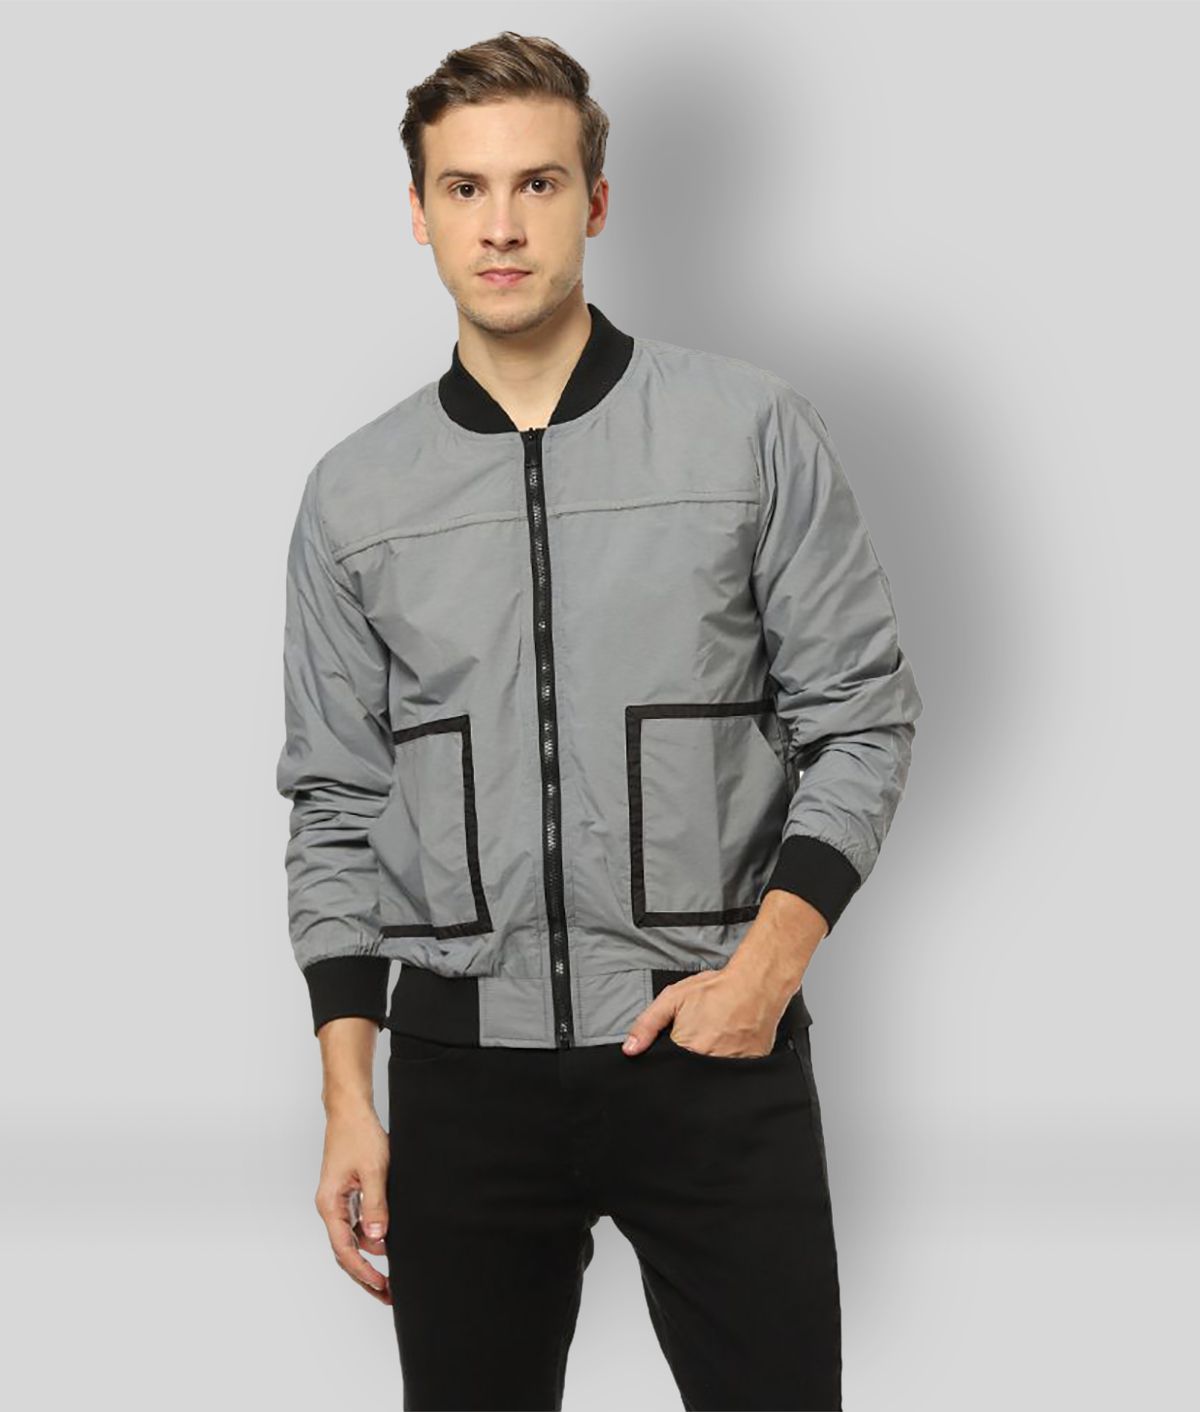     			Campus Sutra - Grey Polyester Regular Fit Men's Casual Jacket ( Pack of 1 )